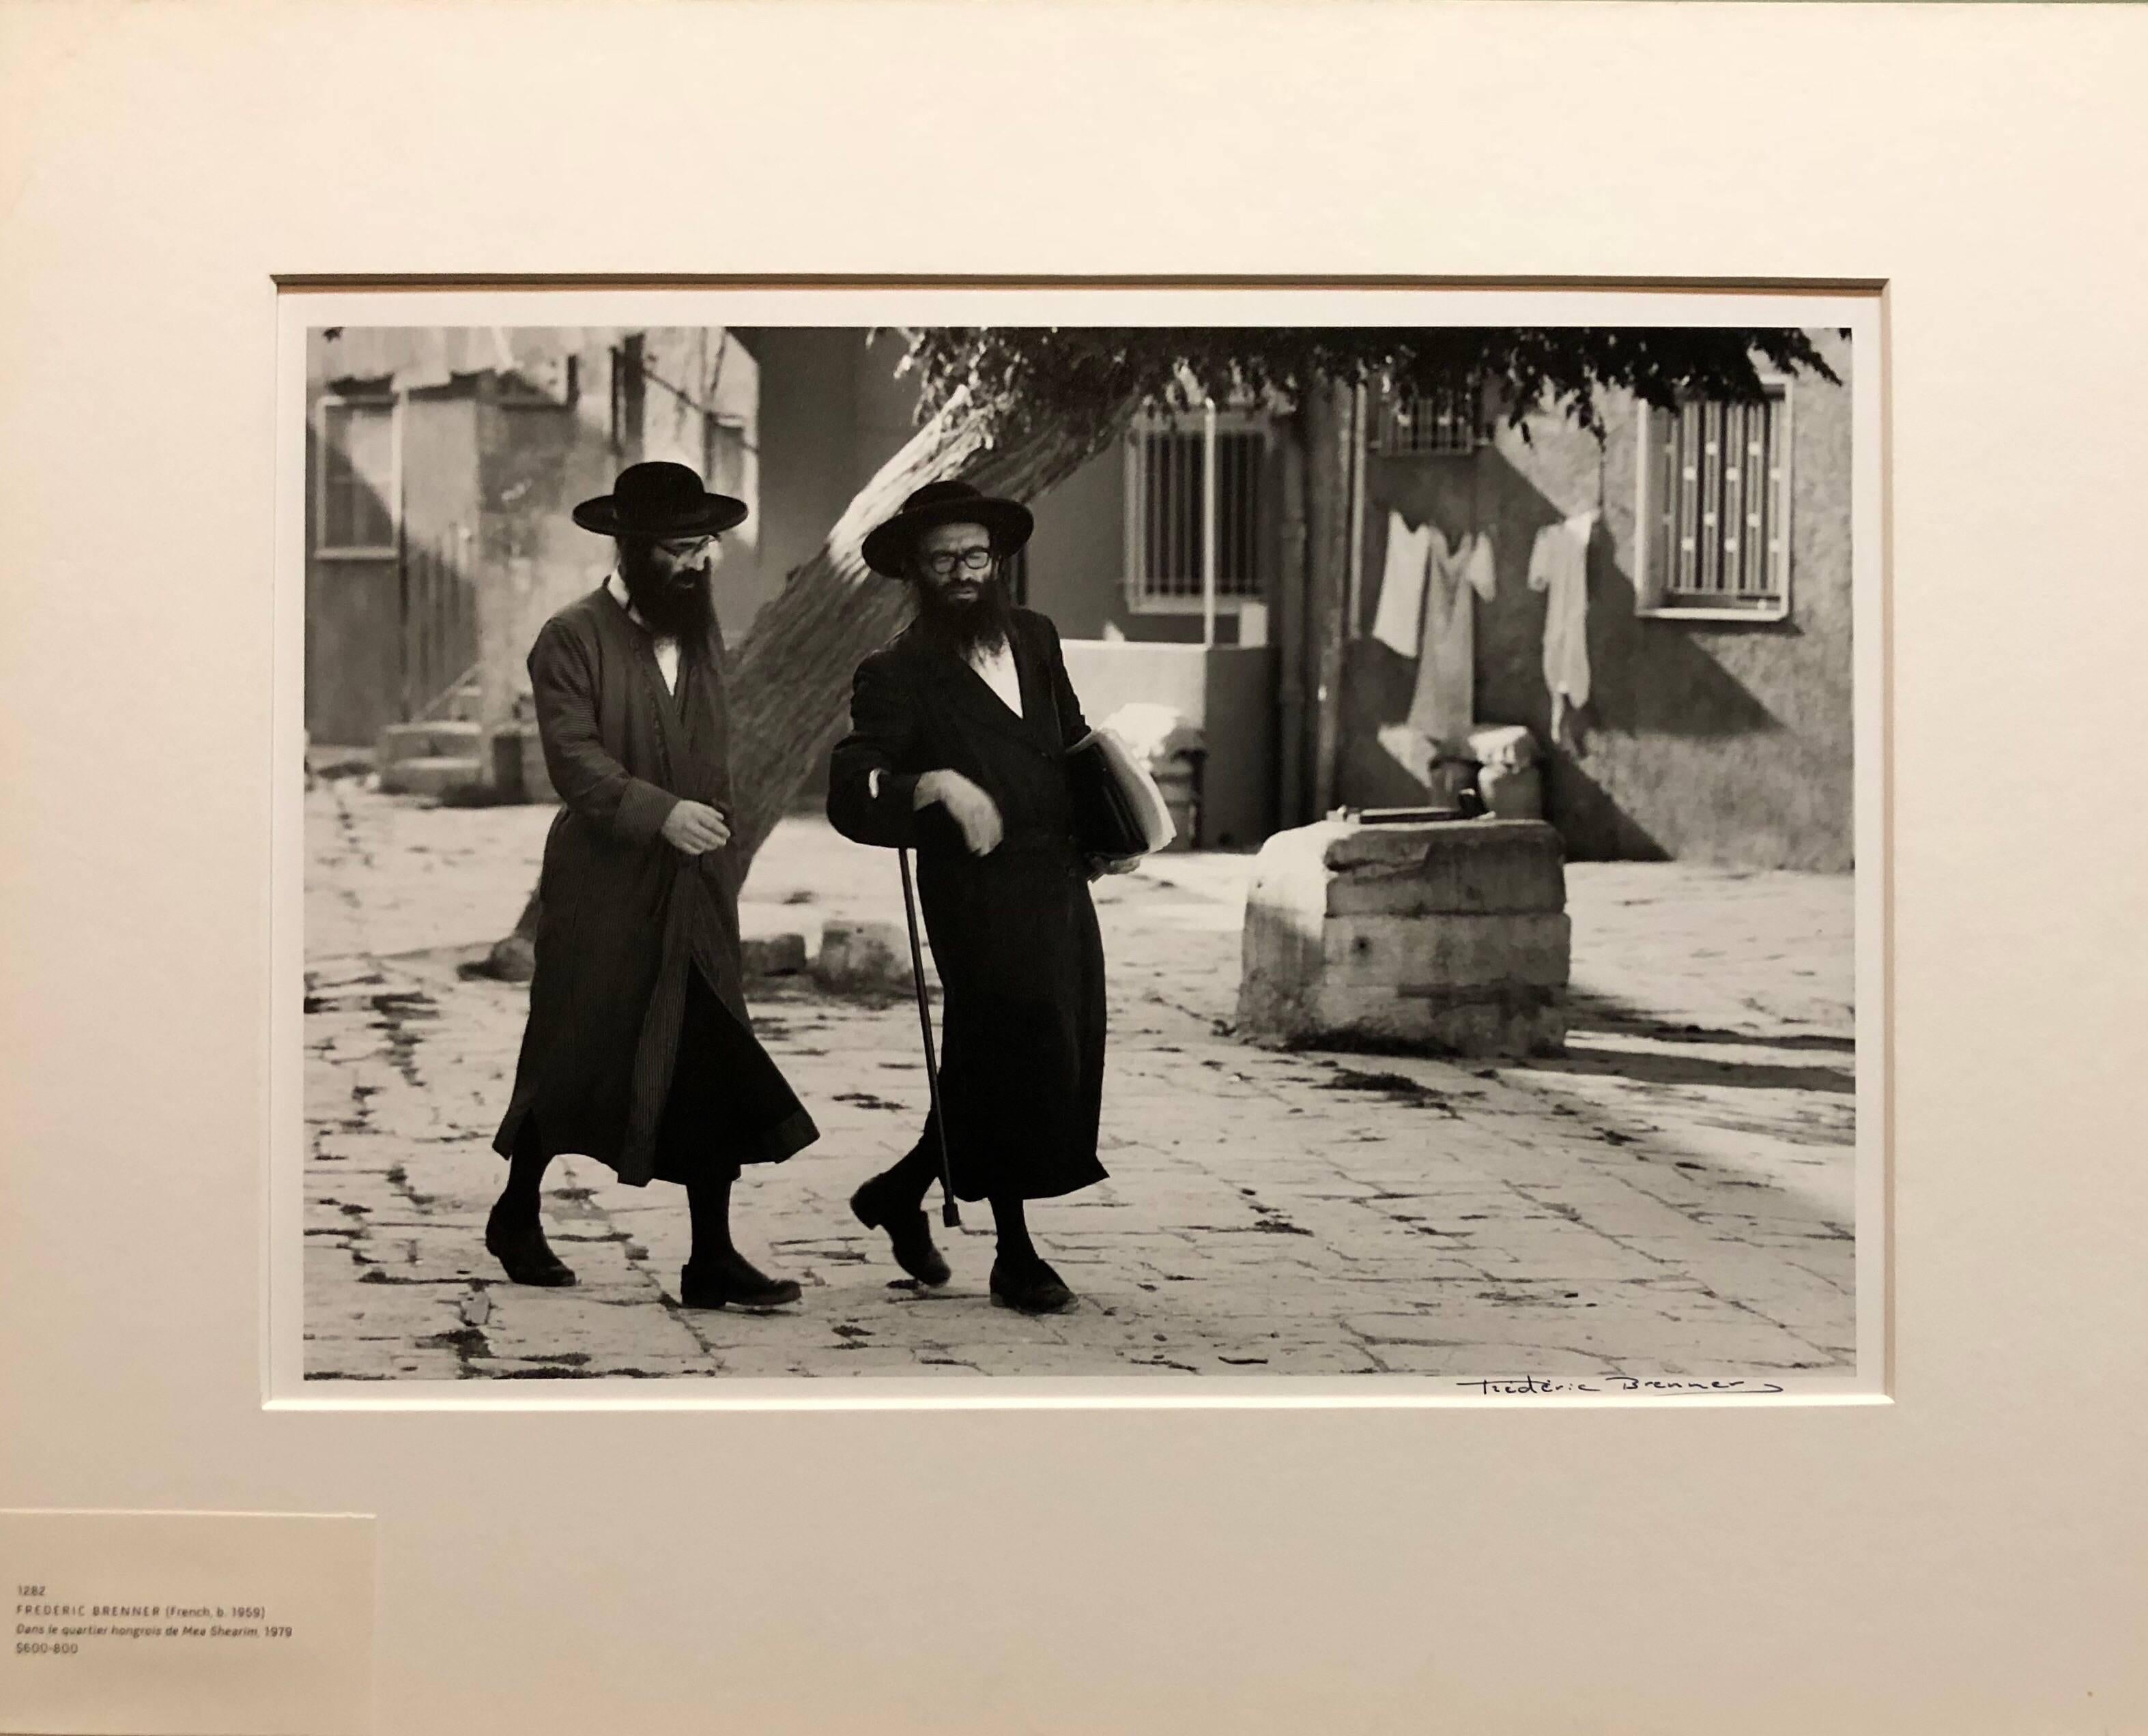 Meah Shearim photograph of Torah scholars. Rabbis in Jerusalem. Photo of Hungarian quarter.

Frédéric Brenner (born 1959) is a French photographer known for his documentation of Jewish communities around the world. His work has been exhibited